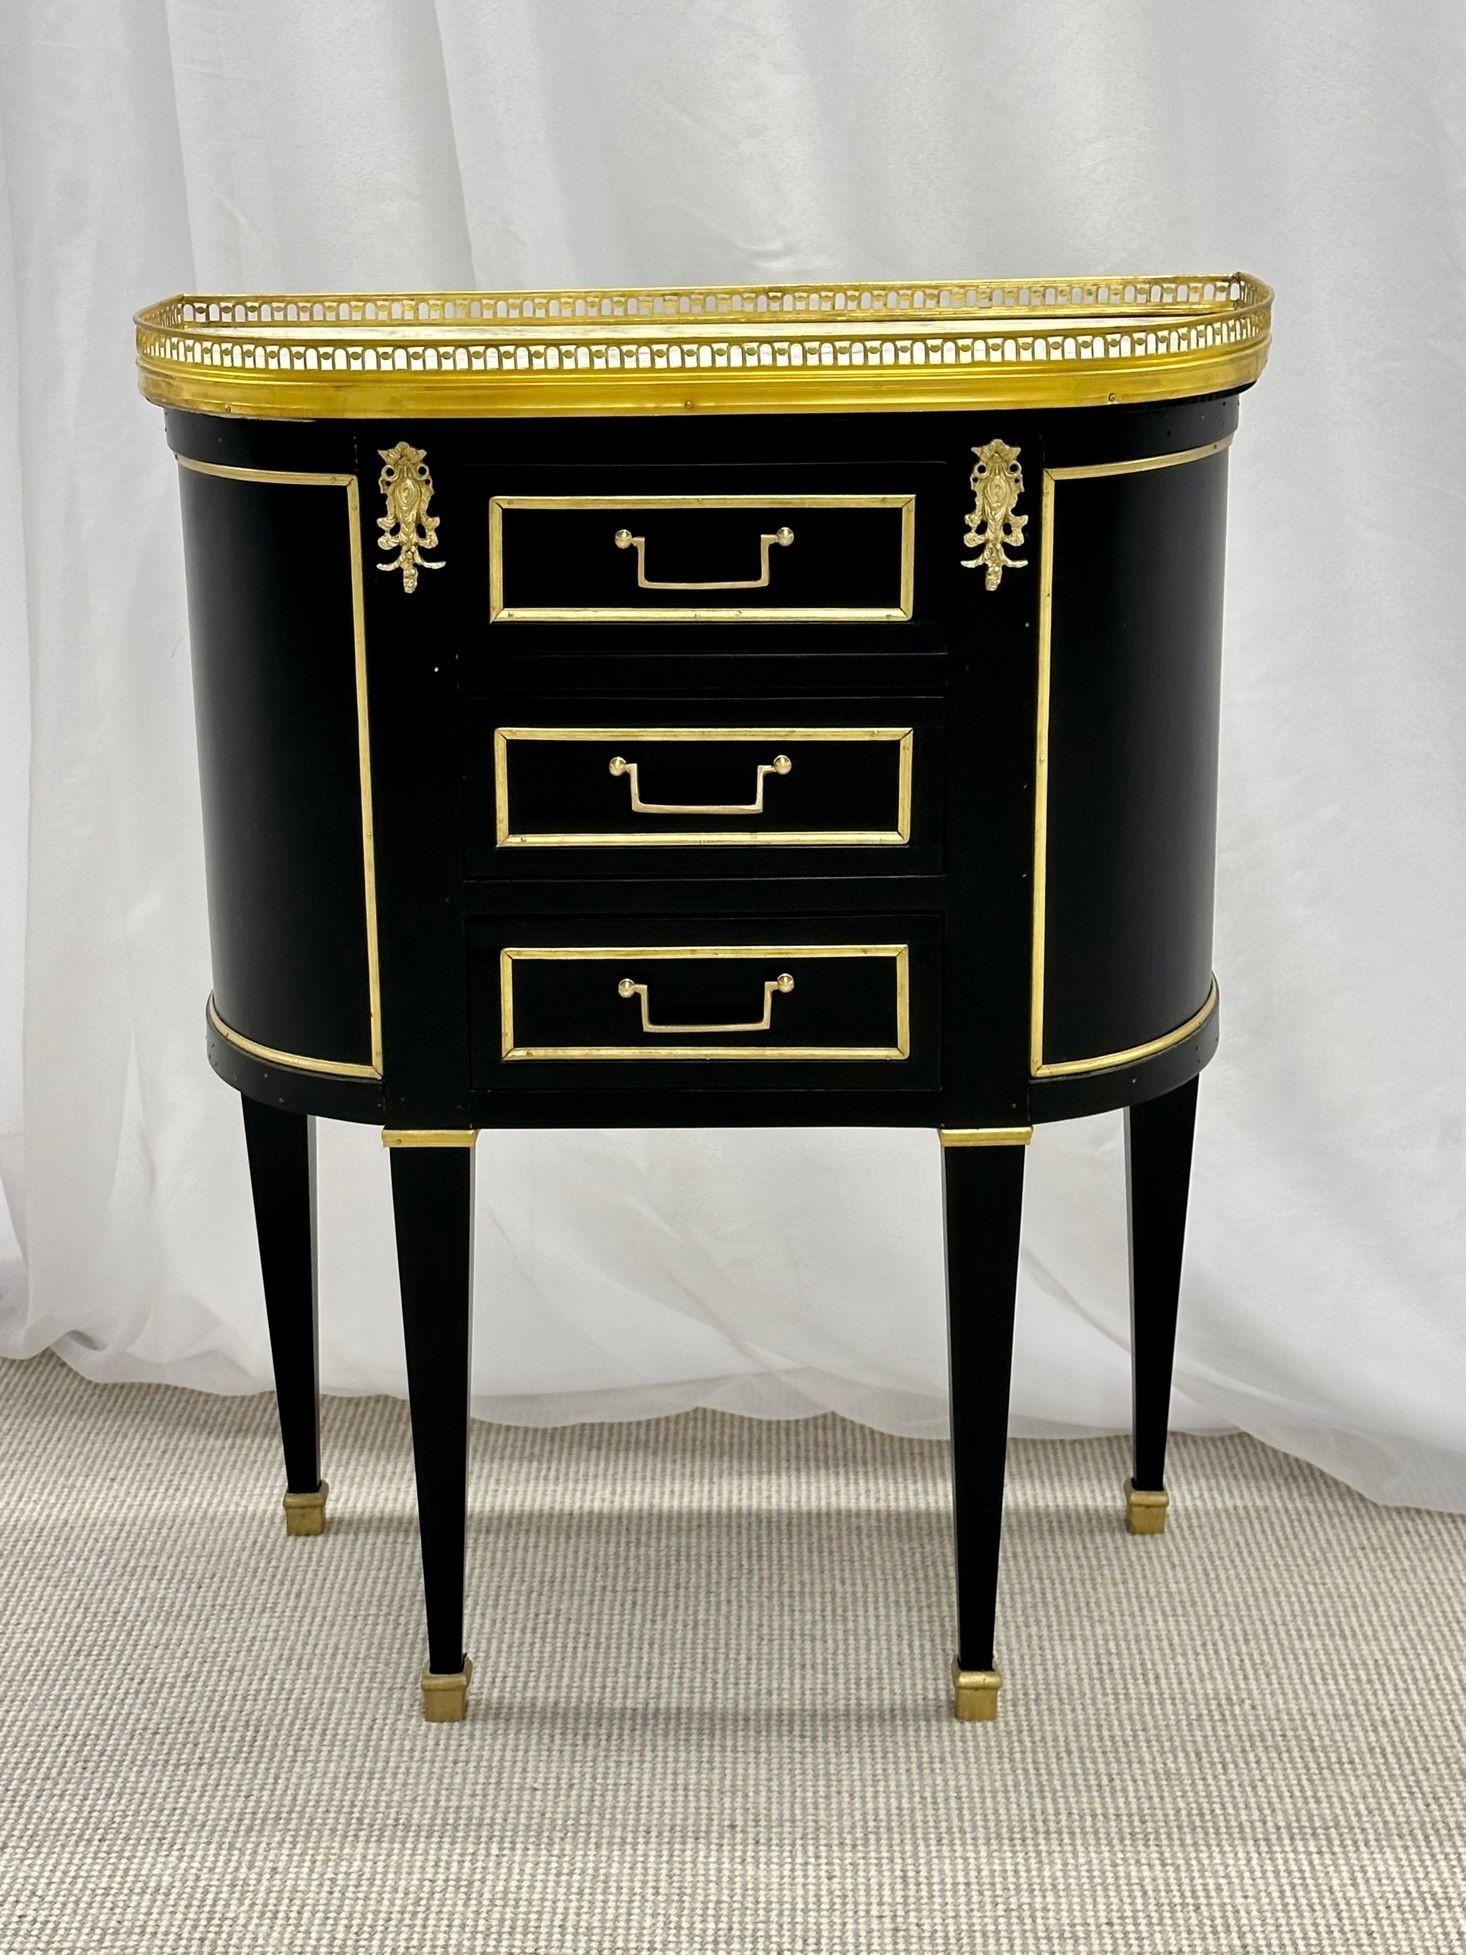 A Maison Jansen Hollywood Regency Style Table, Demi Lune, Marble Top, Bronze Mounted

A finely detailed custom quality end or side table for Livingroom or as Bedside tables. Fully refinished in ebony with bronze mounts. This Three drawer bronze